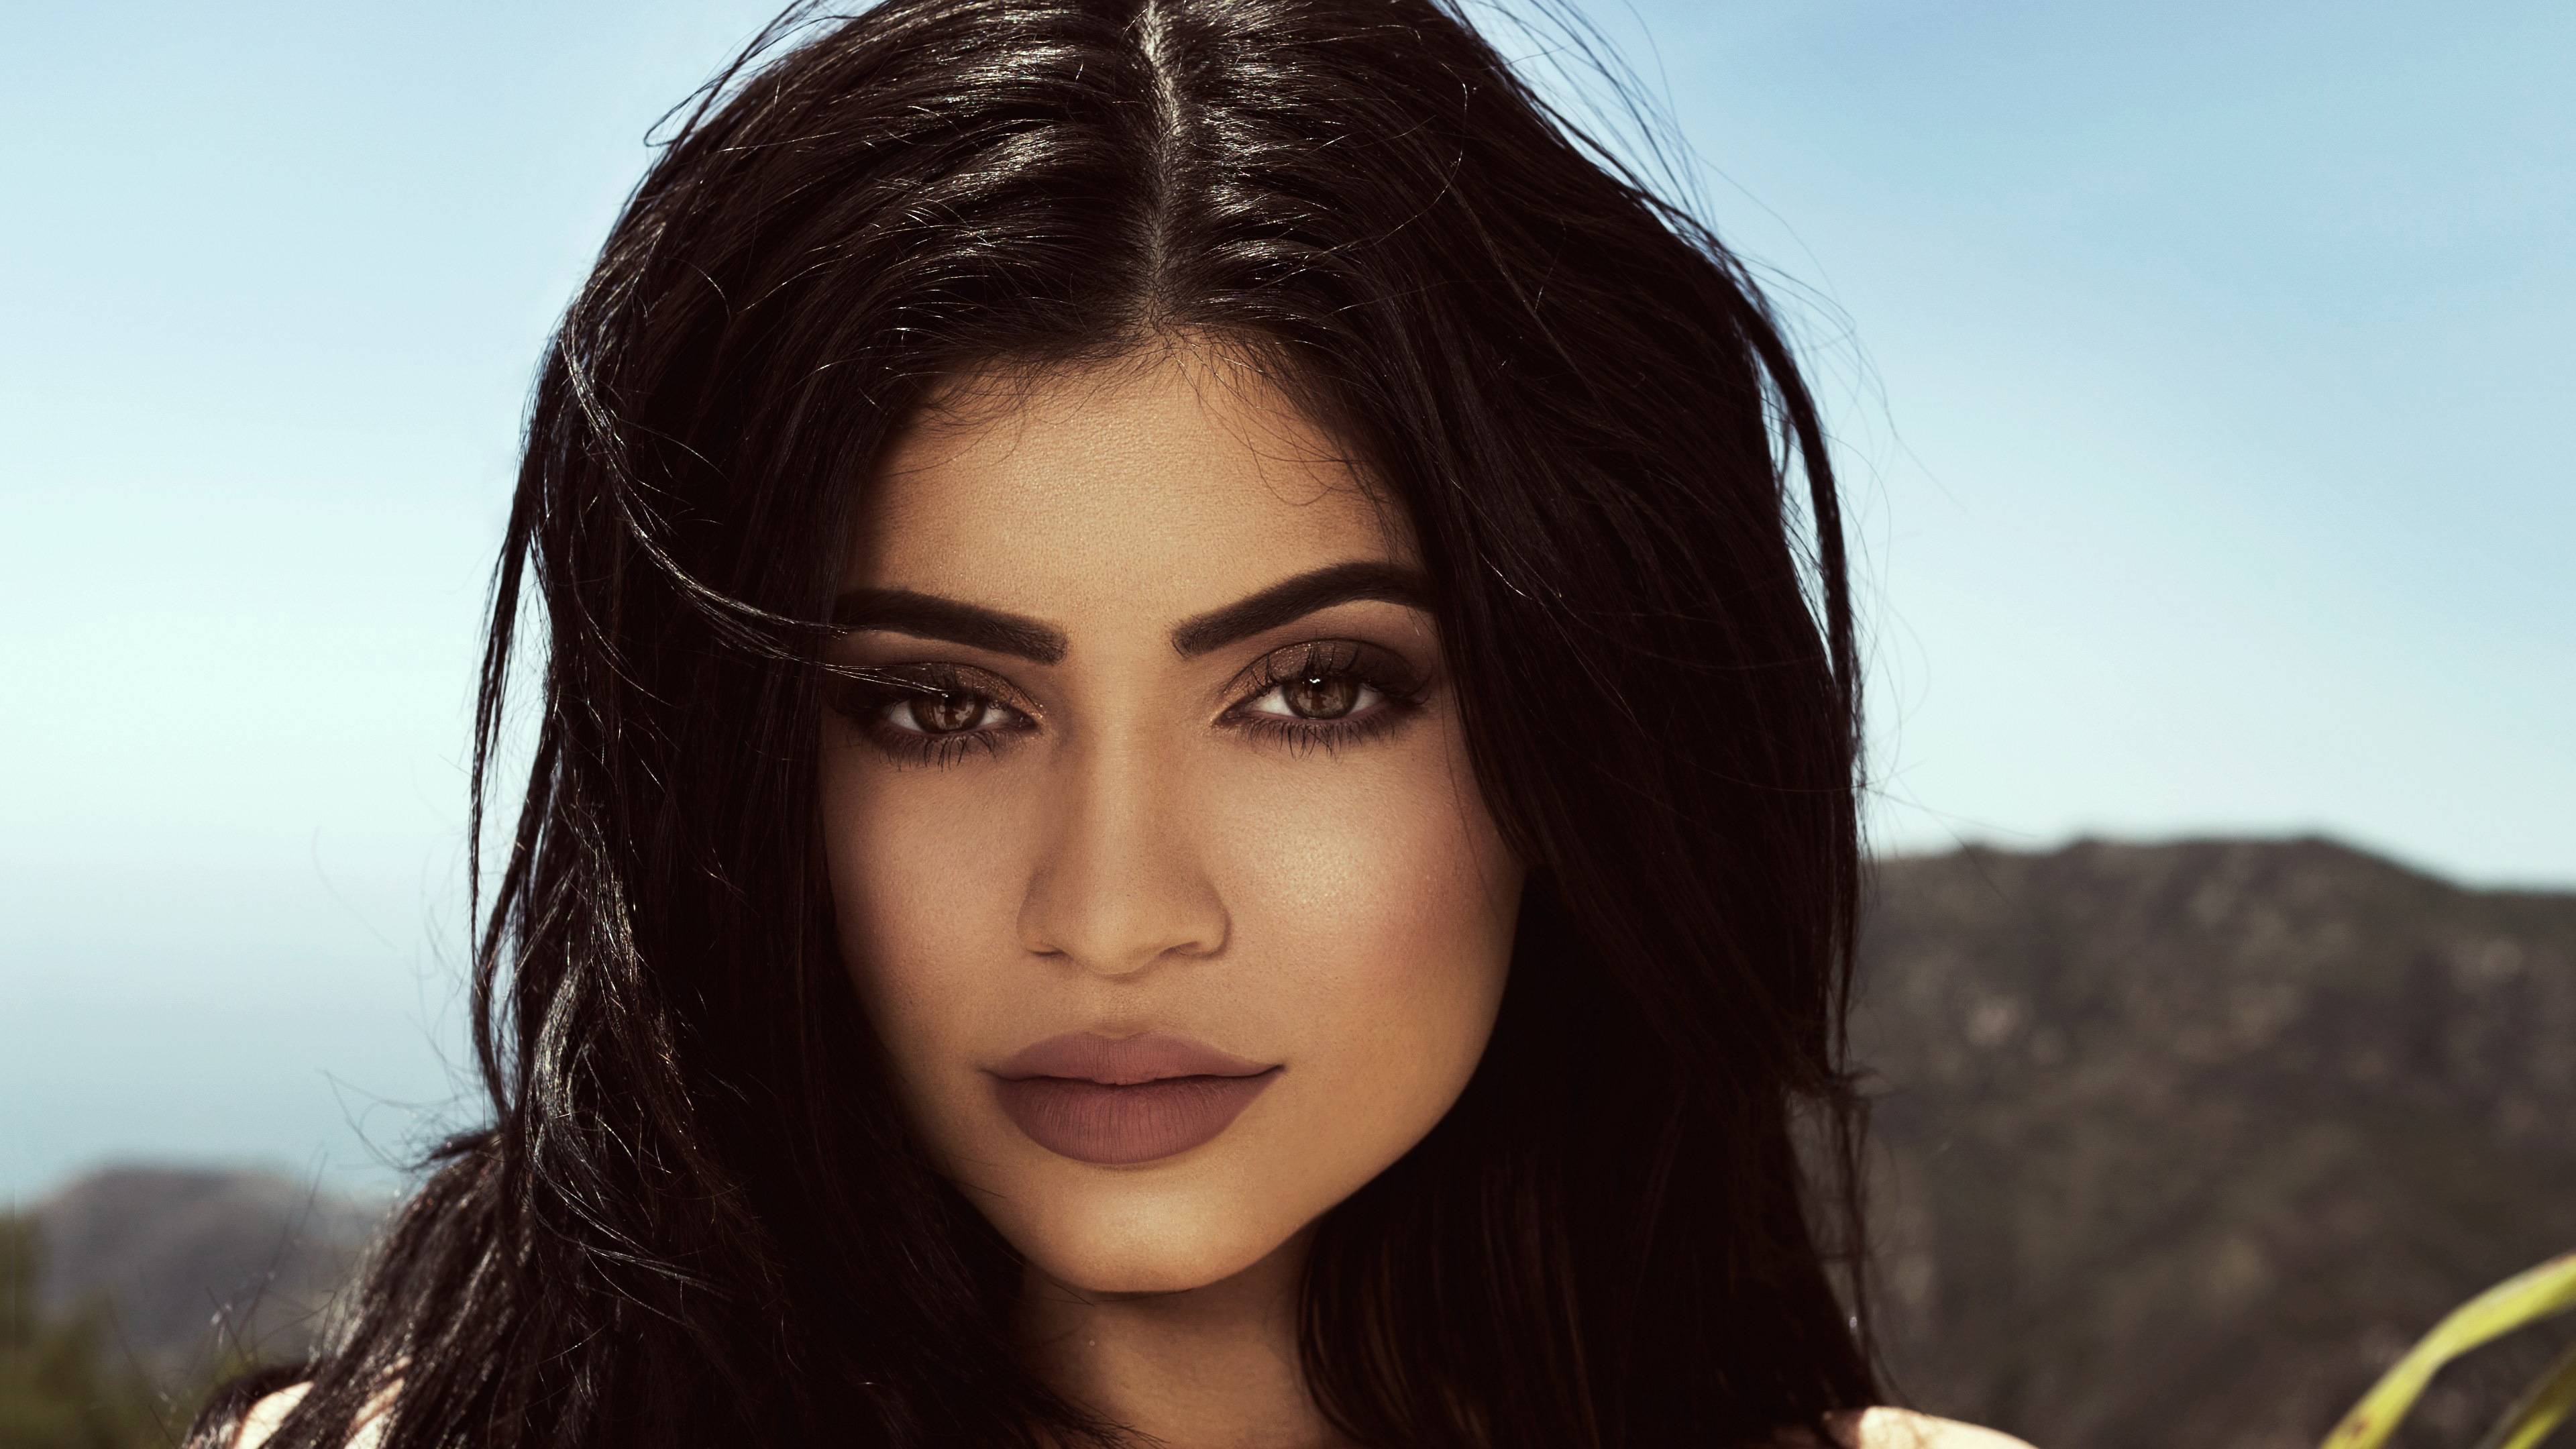 Kylie Jenner Wallpapers Top Free Kylie Jenner Backgrounds Images, Photos, Reviews